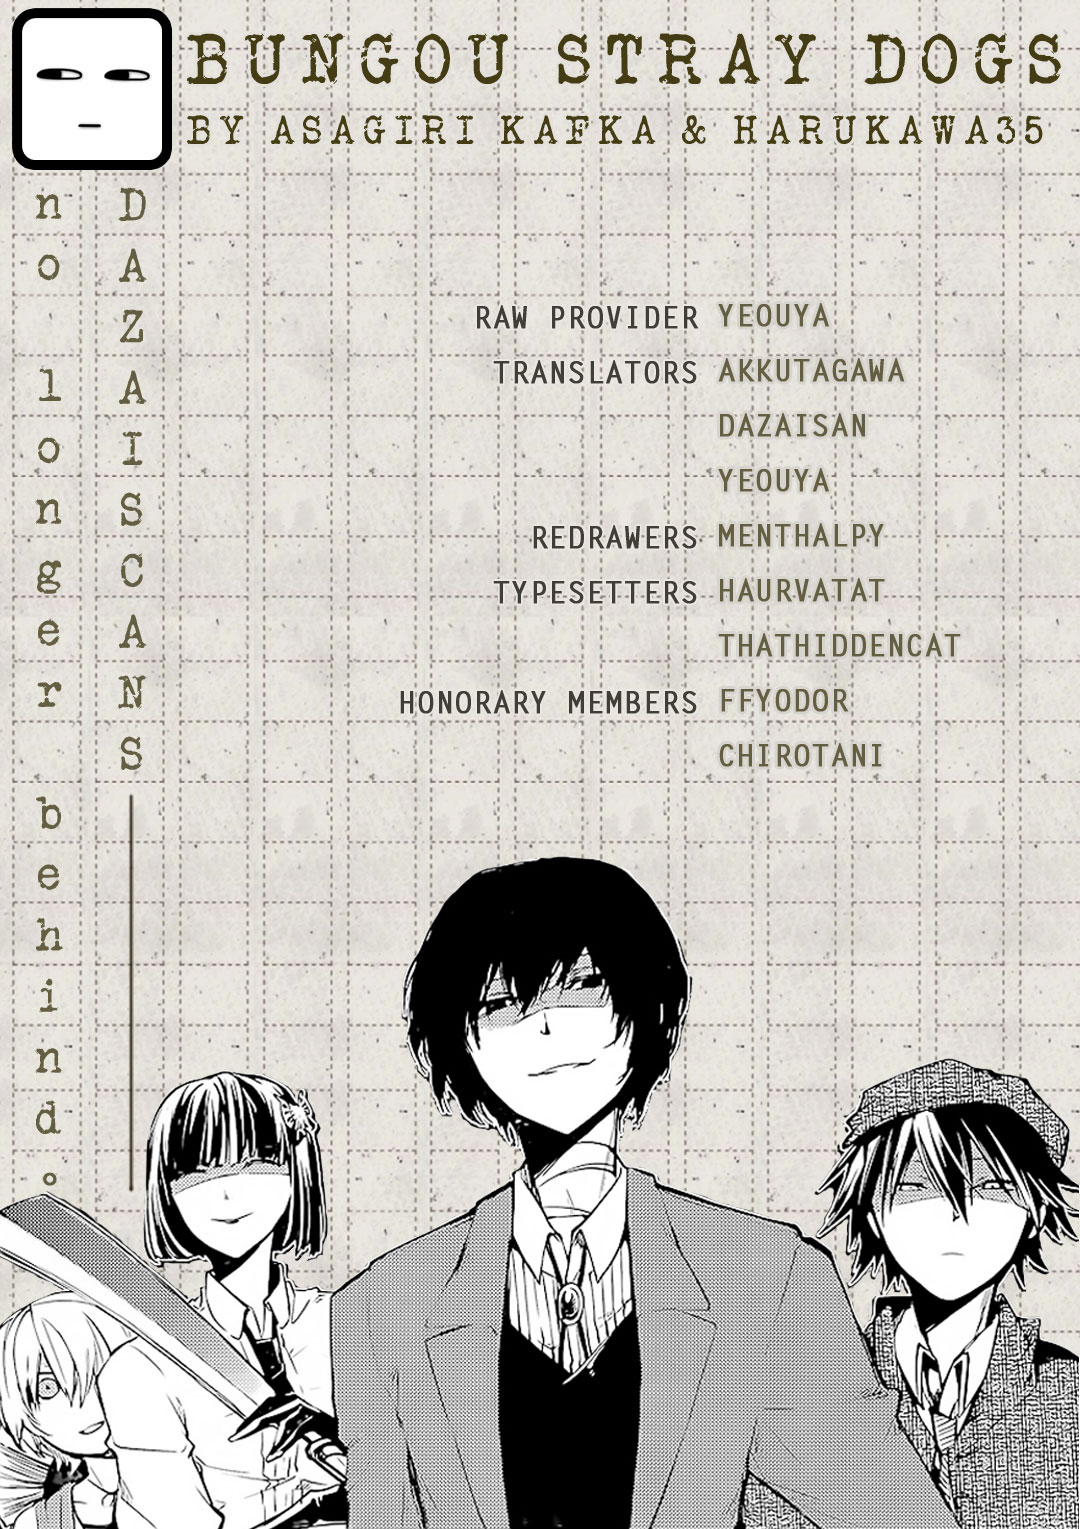 Bungo Stray Dogs Ch. 66 Dreaming of Butterflies [Conclusion]